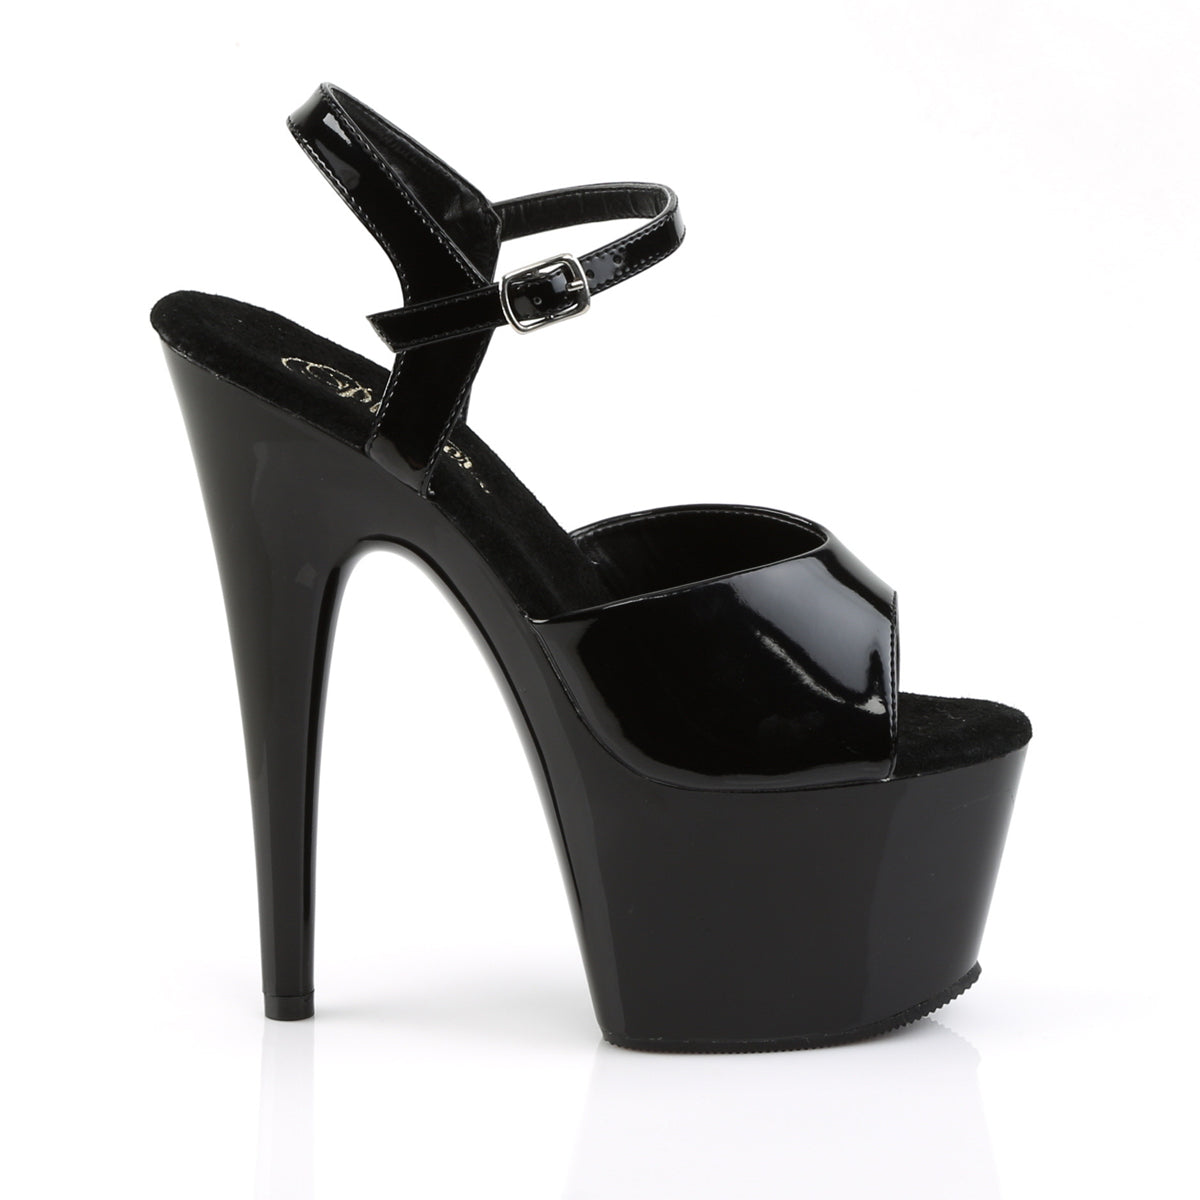 ADORE-709 / B / M 7 "PLEASER FAST DELIVERY 24-48h 